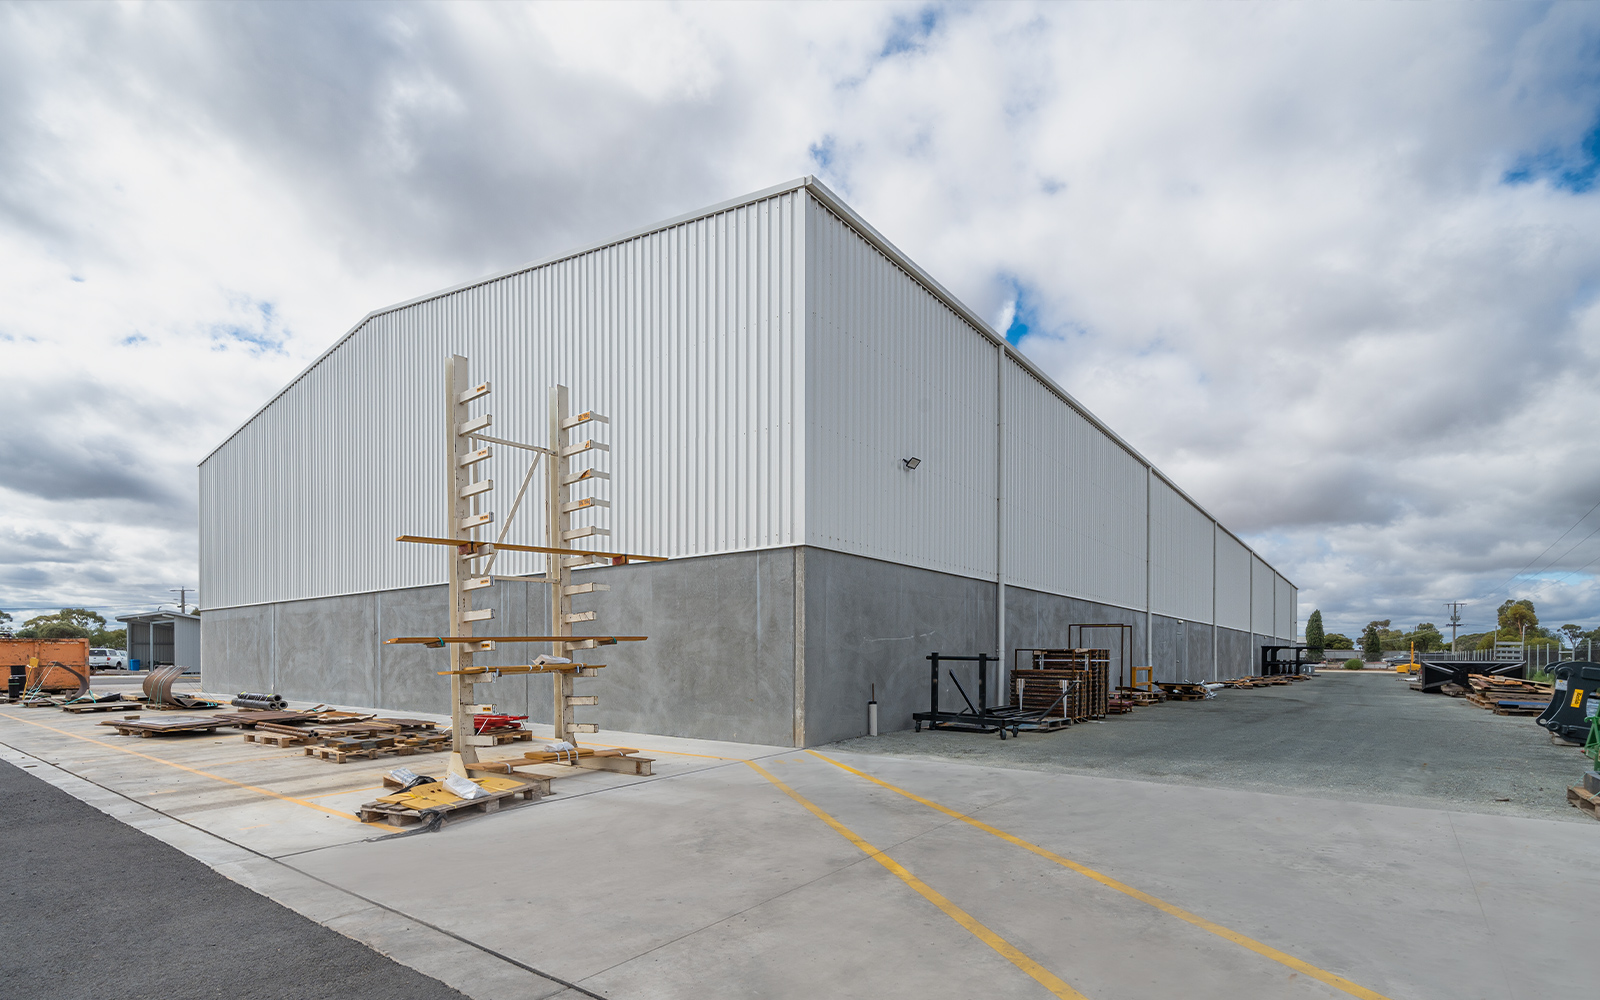 Kerfab Industries manufacturing shed